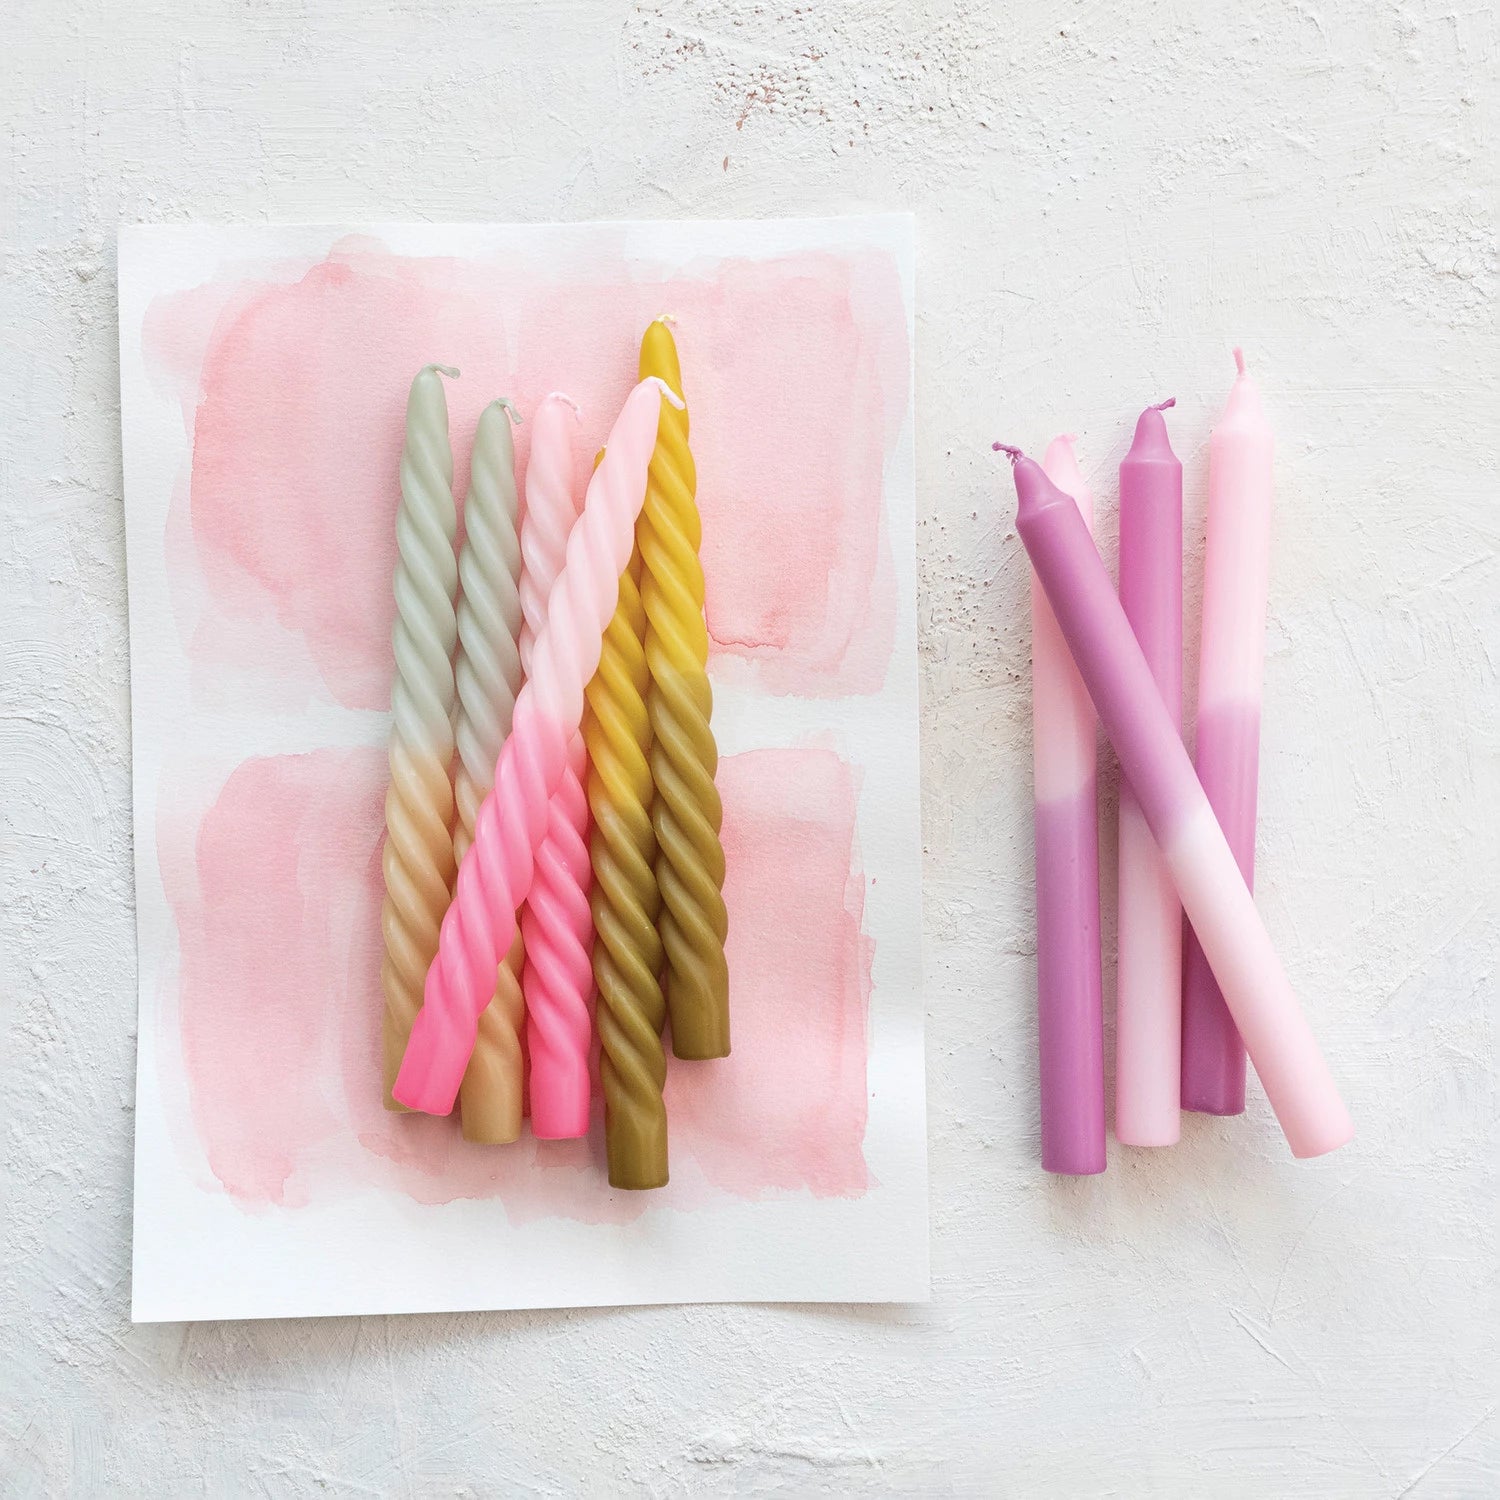 Unscented Twisted Taper Candles, Pink Ombre, Set of 2